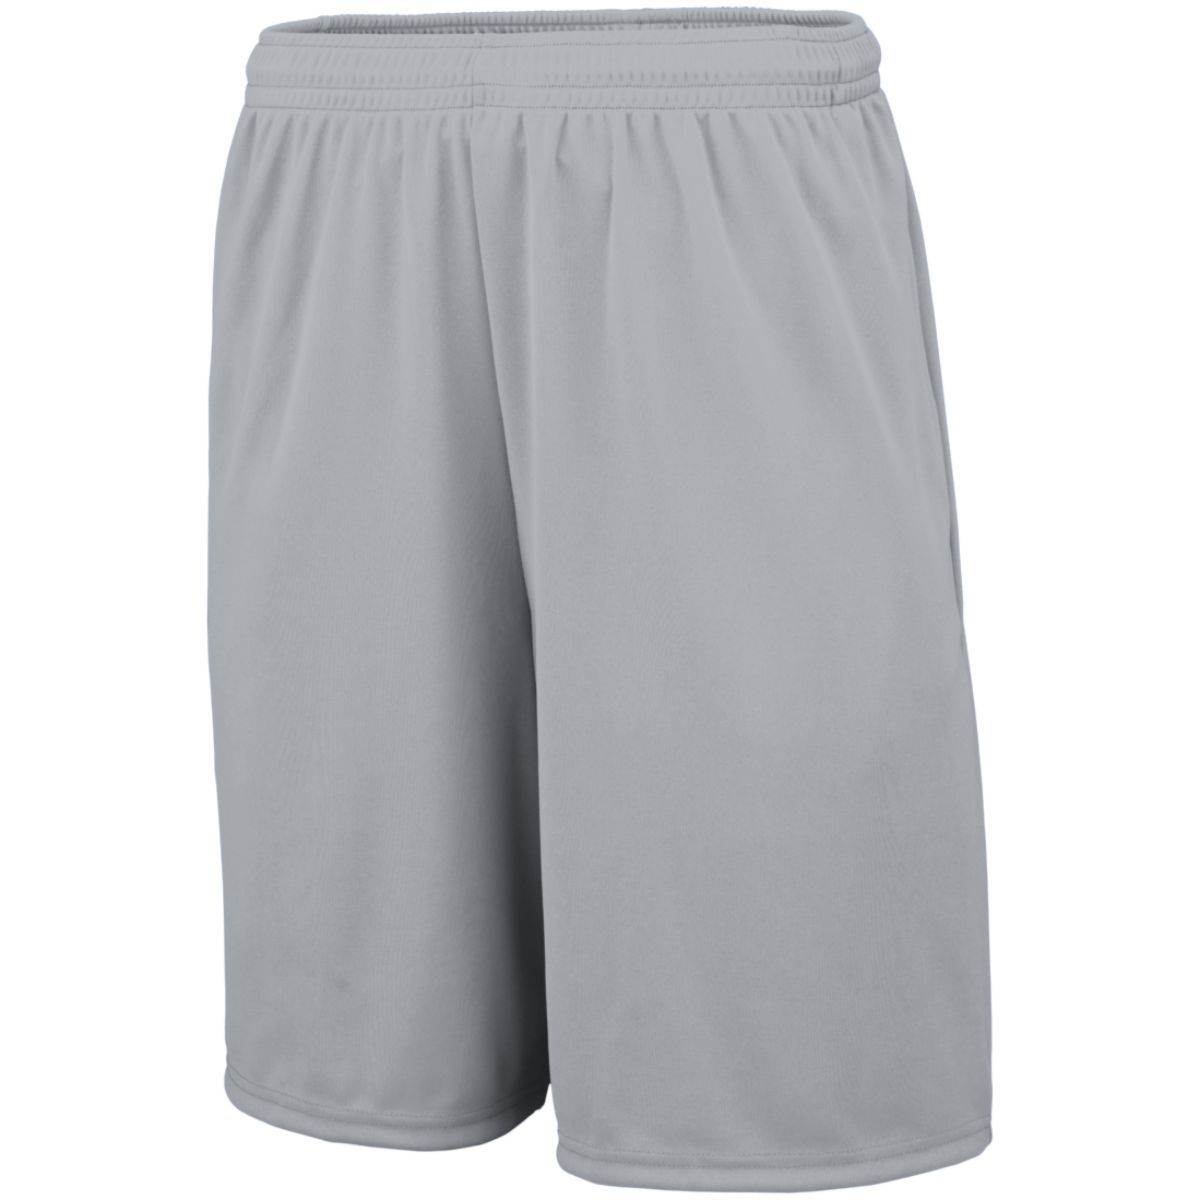 Augusta Sportswear Youth Training Shorts With Pockets in Silver Grey  -Part of the Youth, Youth-Shorts, Augusta-Products, Lacrosse, All-Sports, All-Sports-1 product lines at KanaleyCreations.com